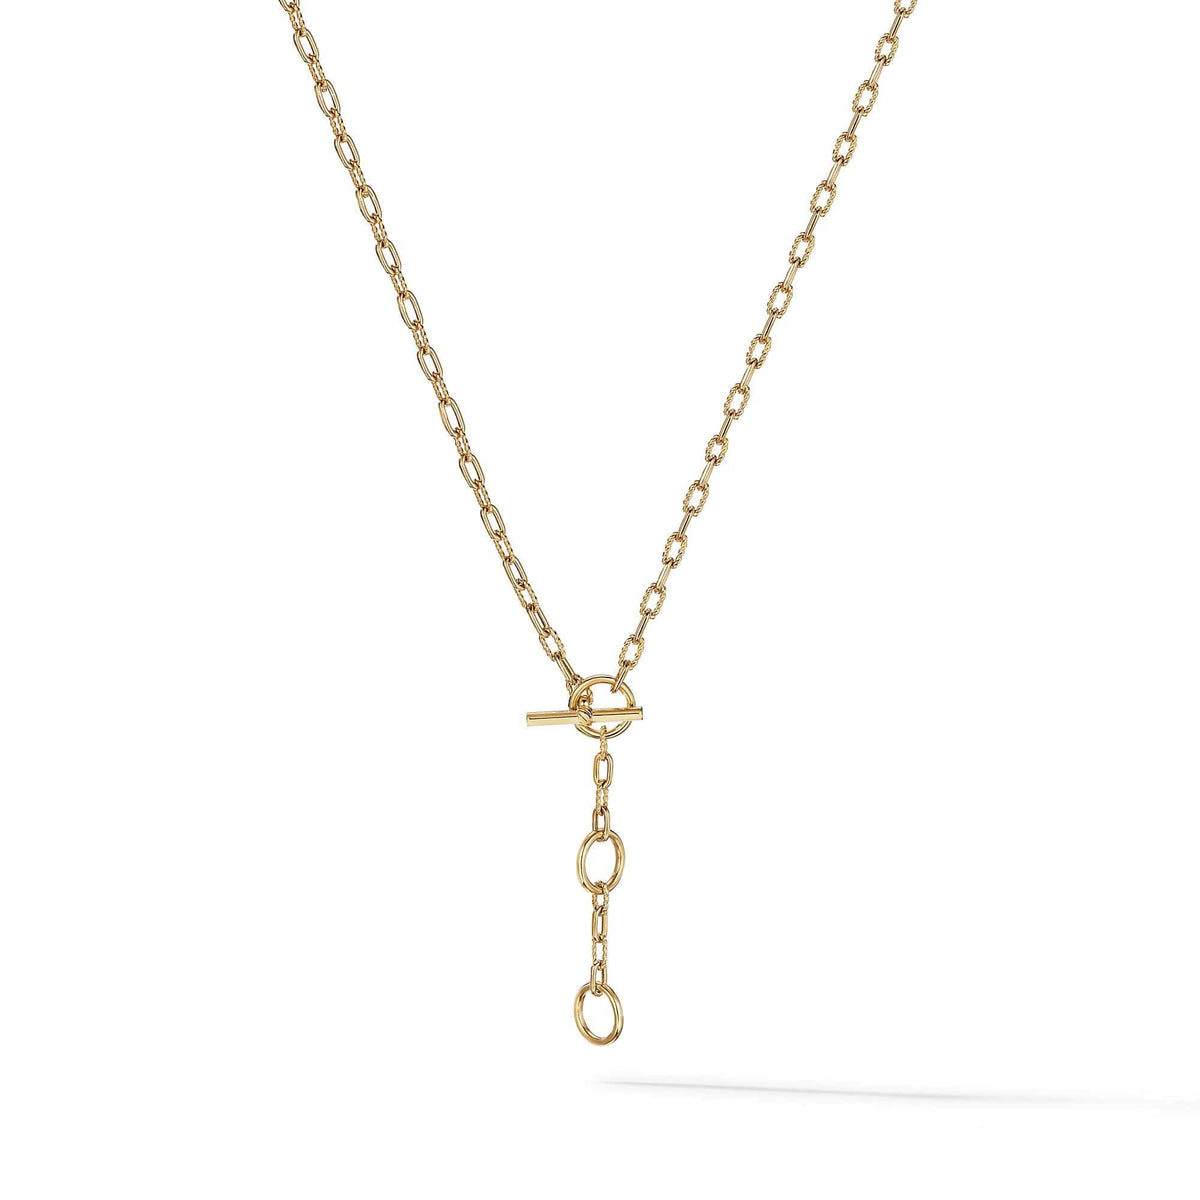 DY Madison® Three Ring Chain Necklace in 18K Yellow Gold